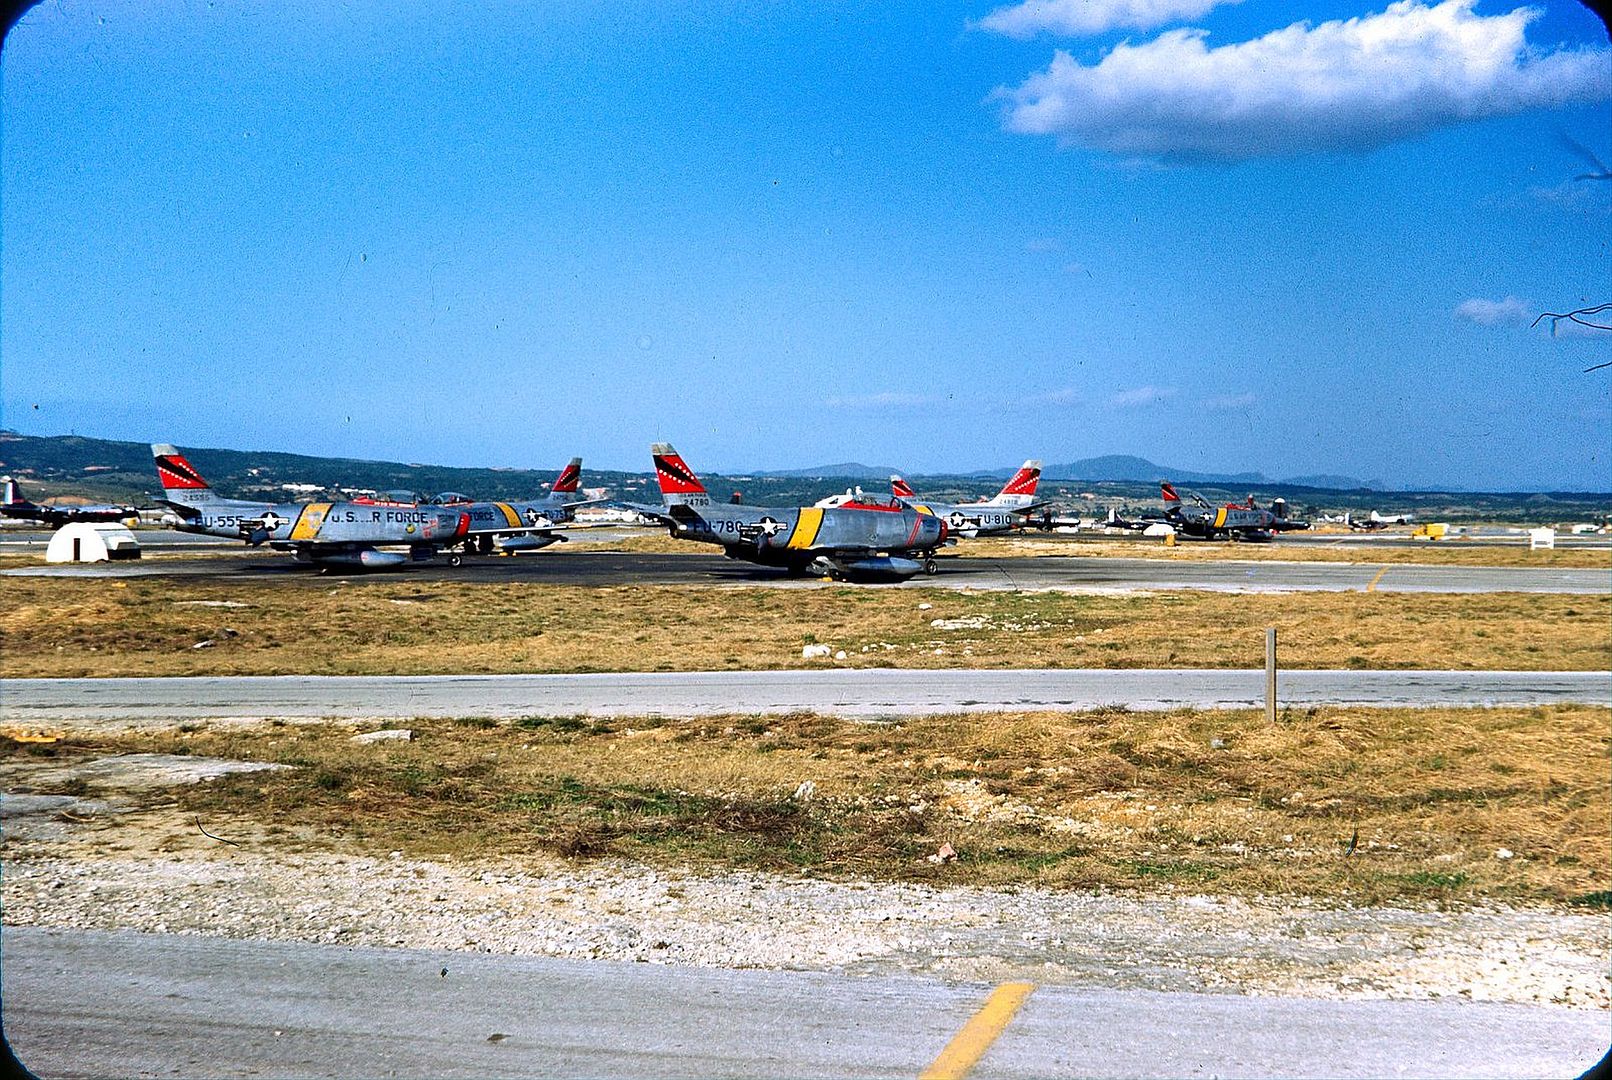 311th Fighter Bomber Squadron 11